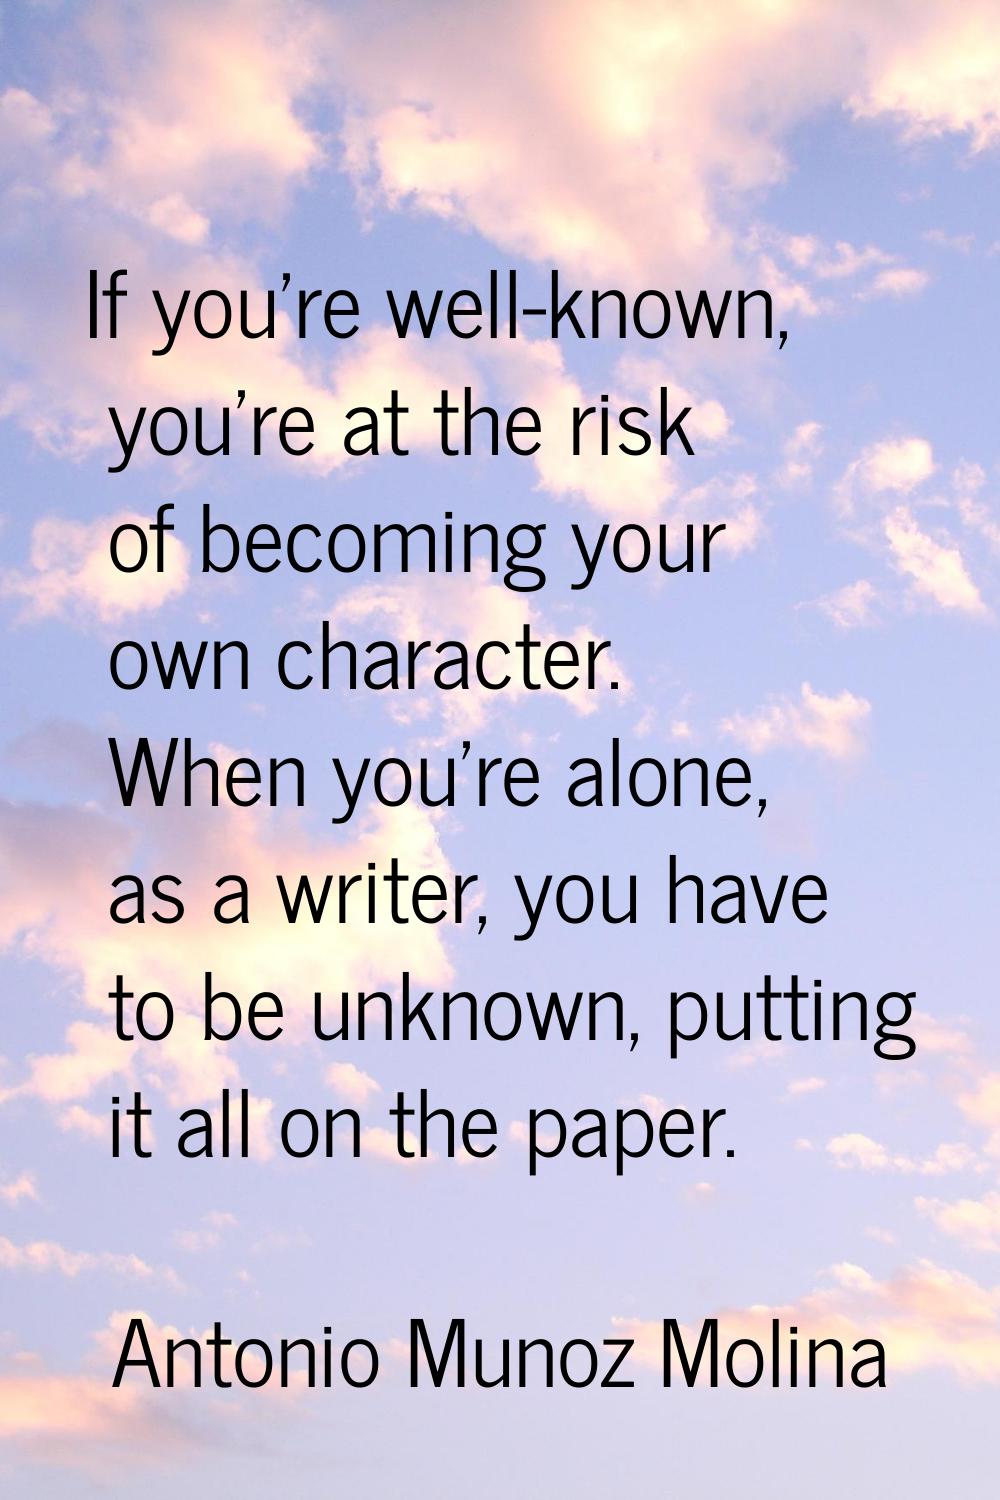 If you're well-known, you're at the risk of becoming your own character. When you're alone, as a wr